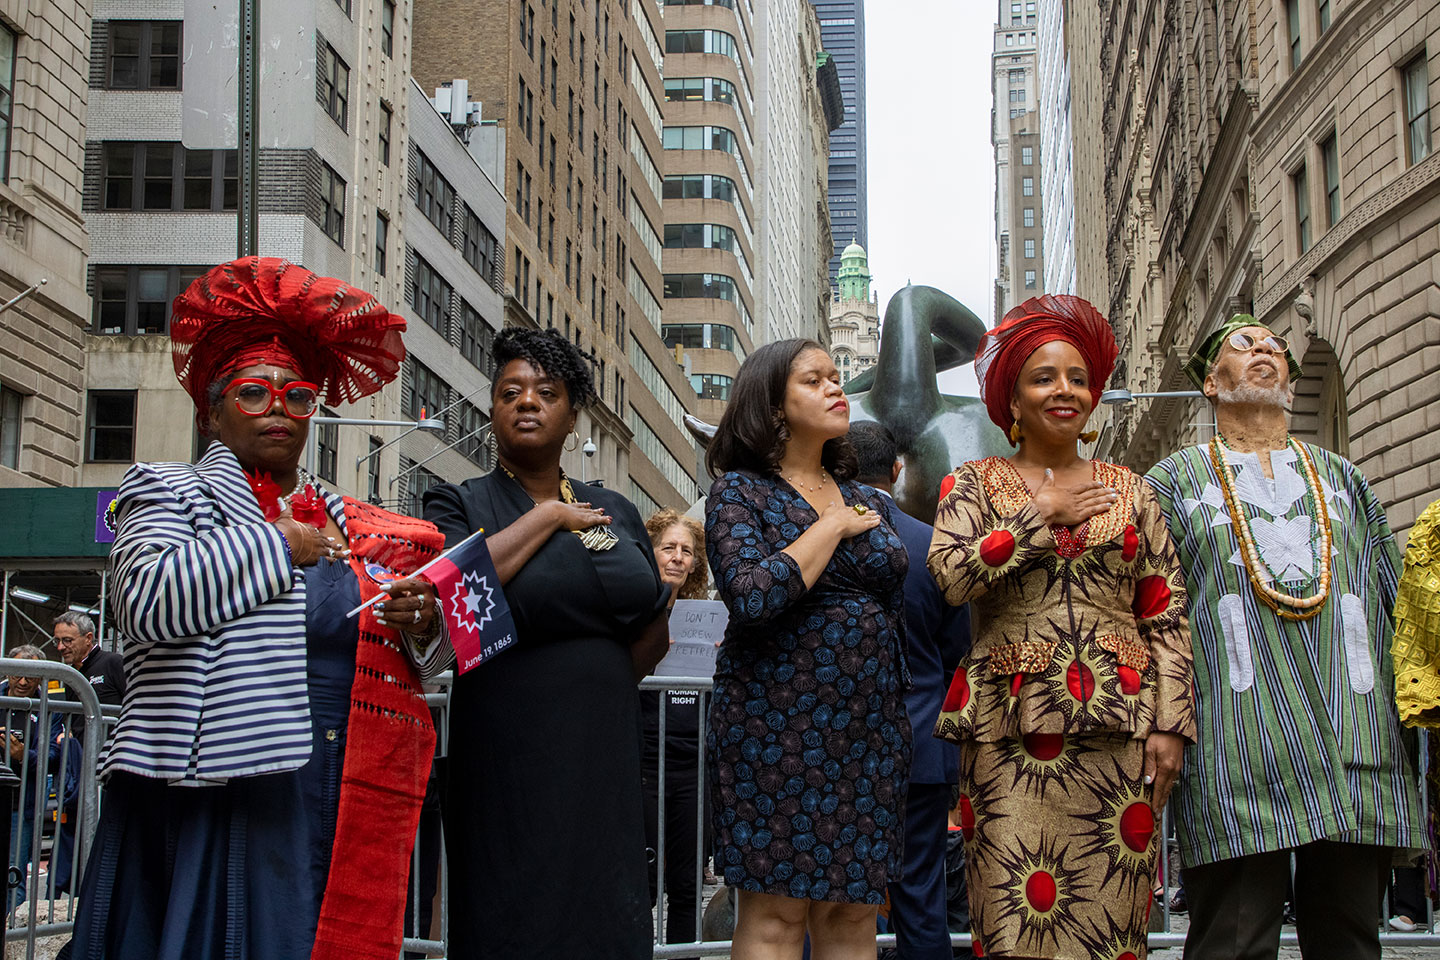 (From Left to Right) Cheryl DB Murphy, National Juneteenth Observance Foundation,
Commissioner Sideya Sherman, NYC Mayor's Office of Equity, Tiffany Raspberry Director of Intergovernmental and External Affairs, Commissioner Laurie Cumbo, NYC Department of Consumer Affairs, and Chief Baba Neil Clarke stand for the National Anthem.